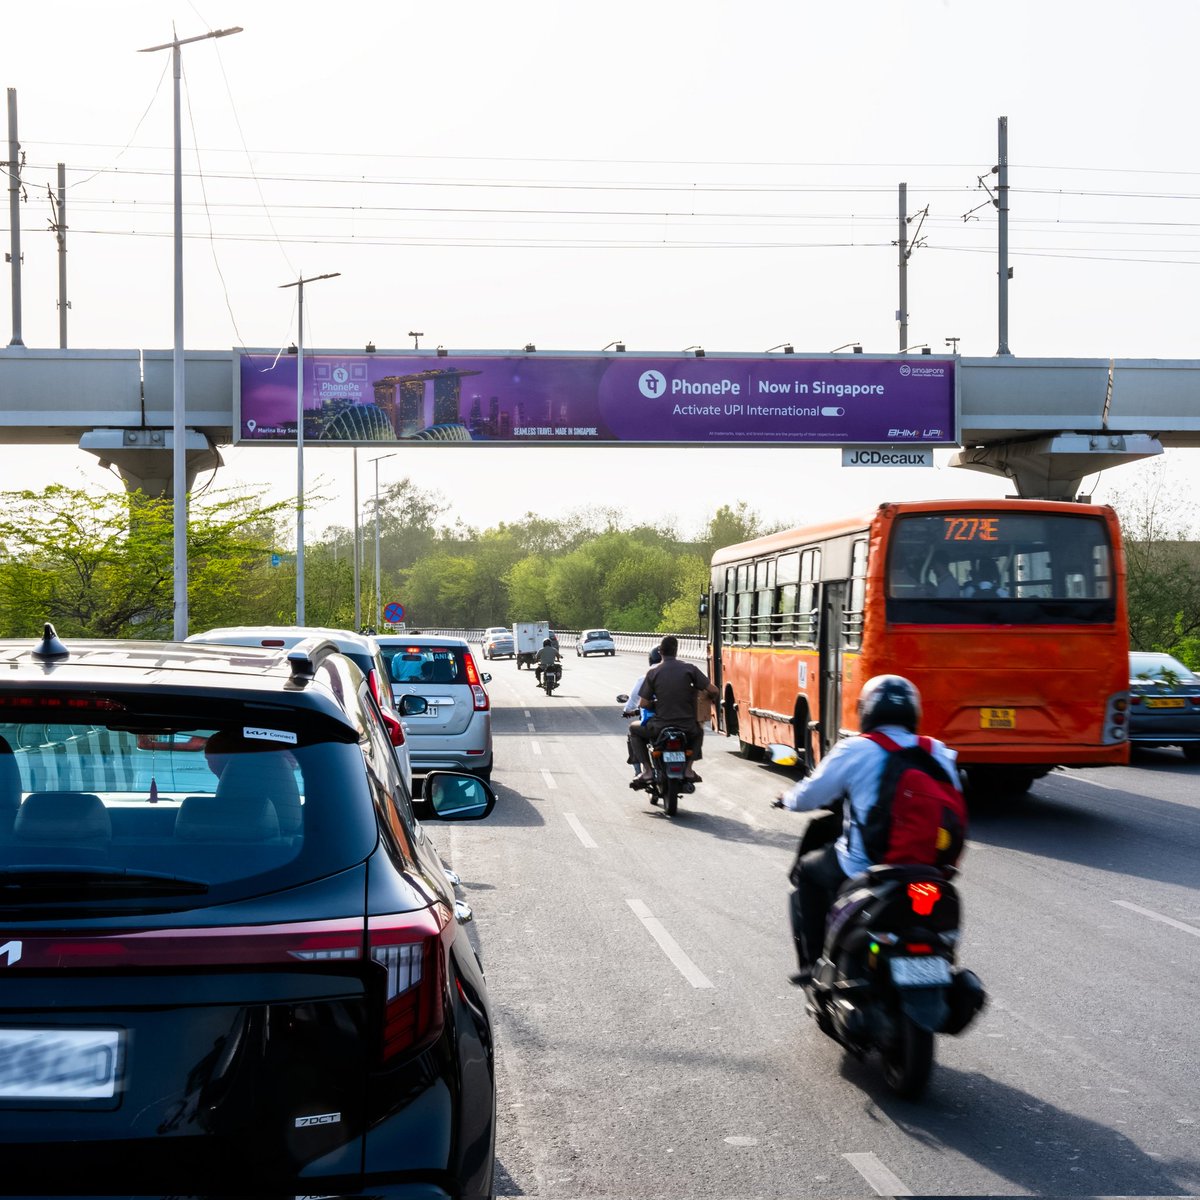 Feeling the PhonePe vibes on JCDecaux Media in Delhi!

Say goodbye to cash and hello to digital payments! 💳✨

#DigitalRevolution #PhonePe #JCDecauxIndia #JCDecauxDelhi #OutdoorAdvertising #StreetAdvertising #JCDecauxCreativity #JCDecauxBranding #advertisingagency